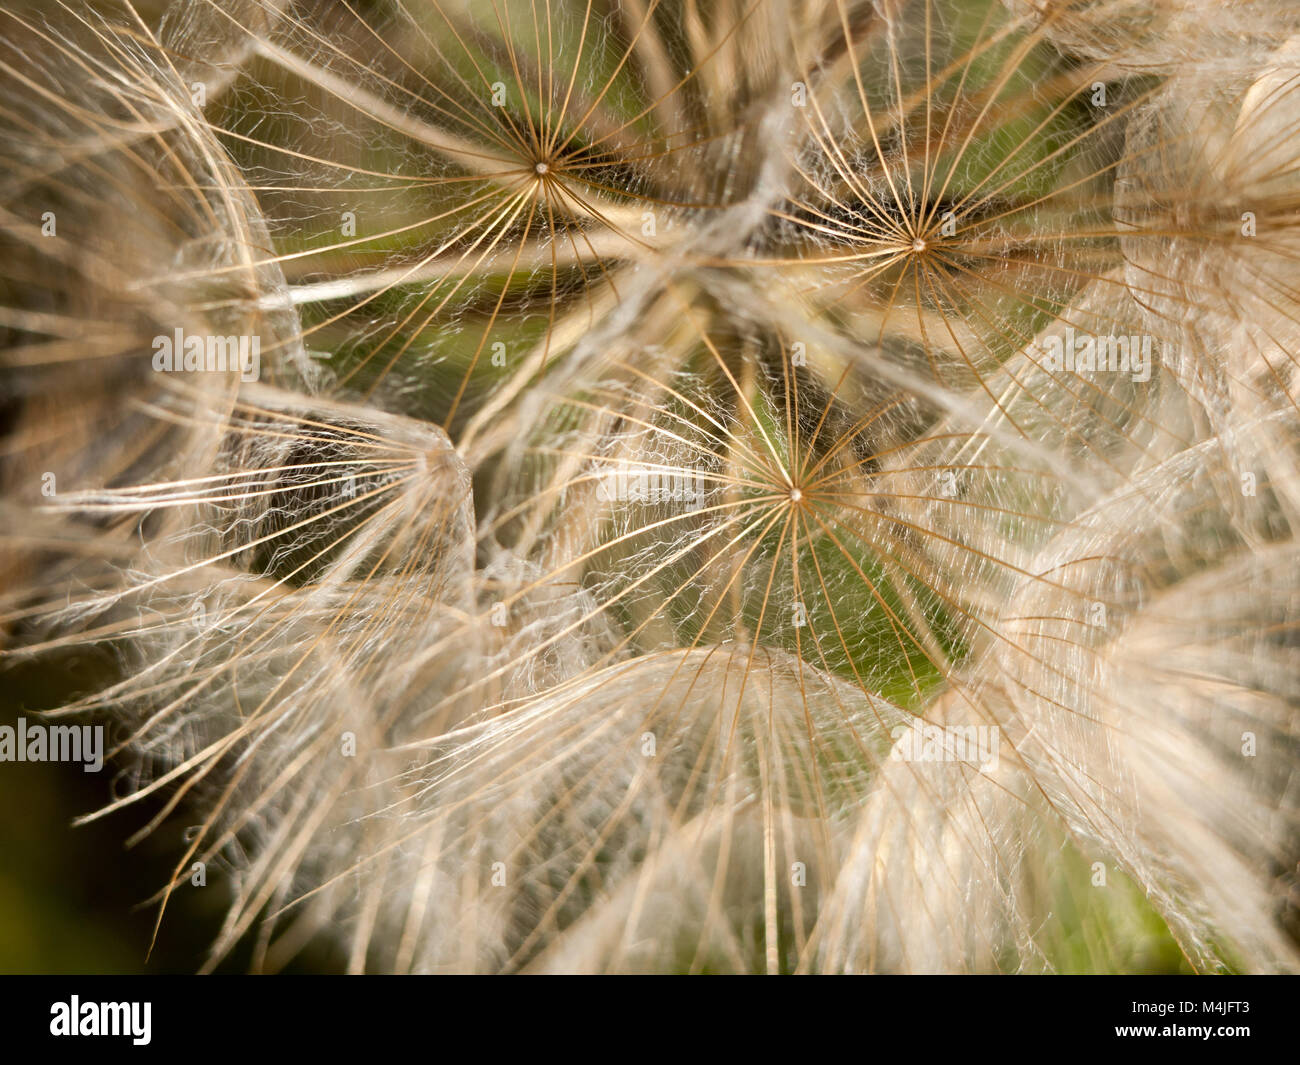 intact close up white dandelion head detail Stock Photo